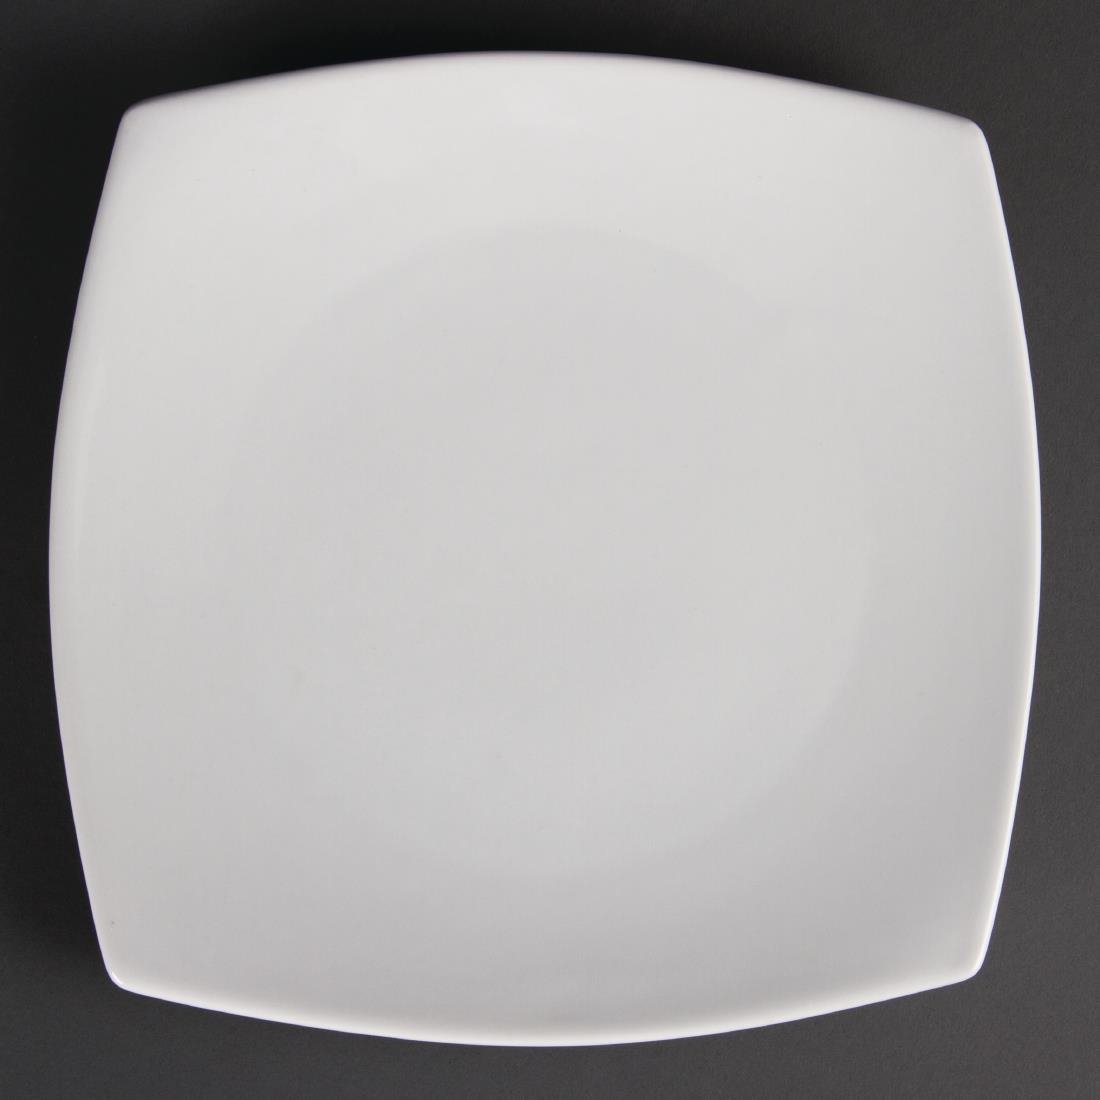 Rounded Square Plate